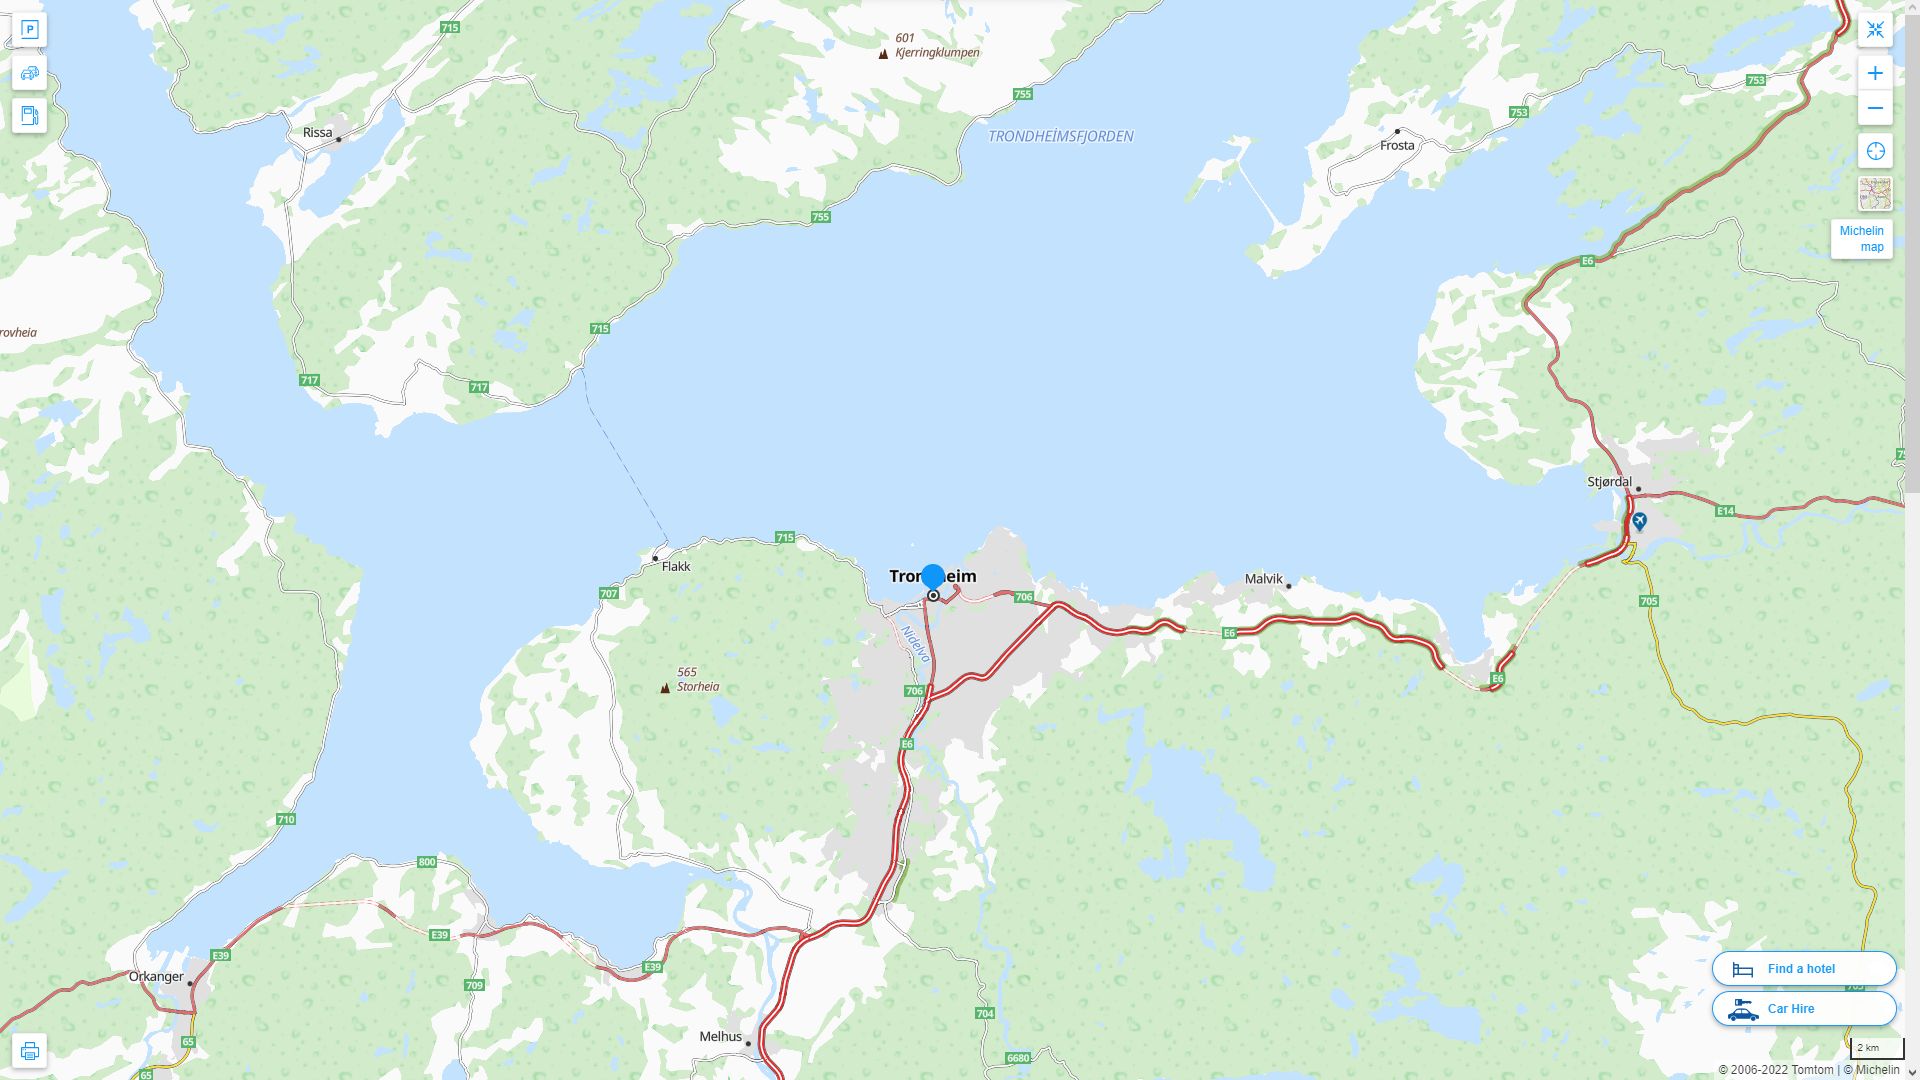 Trondheim Highway and Road Map